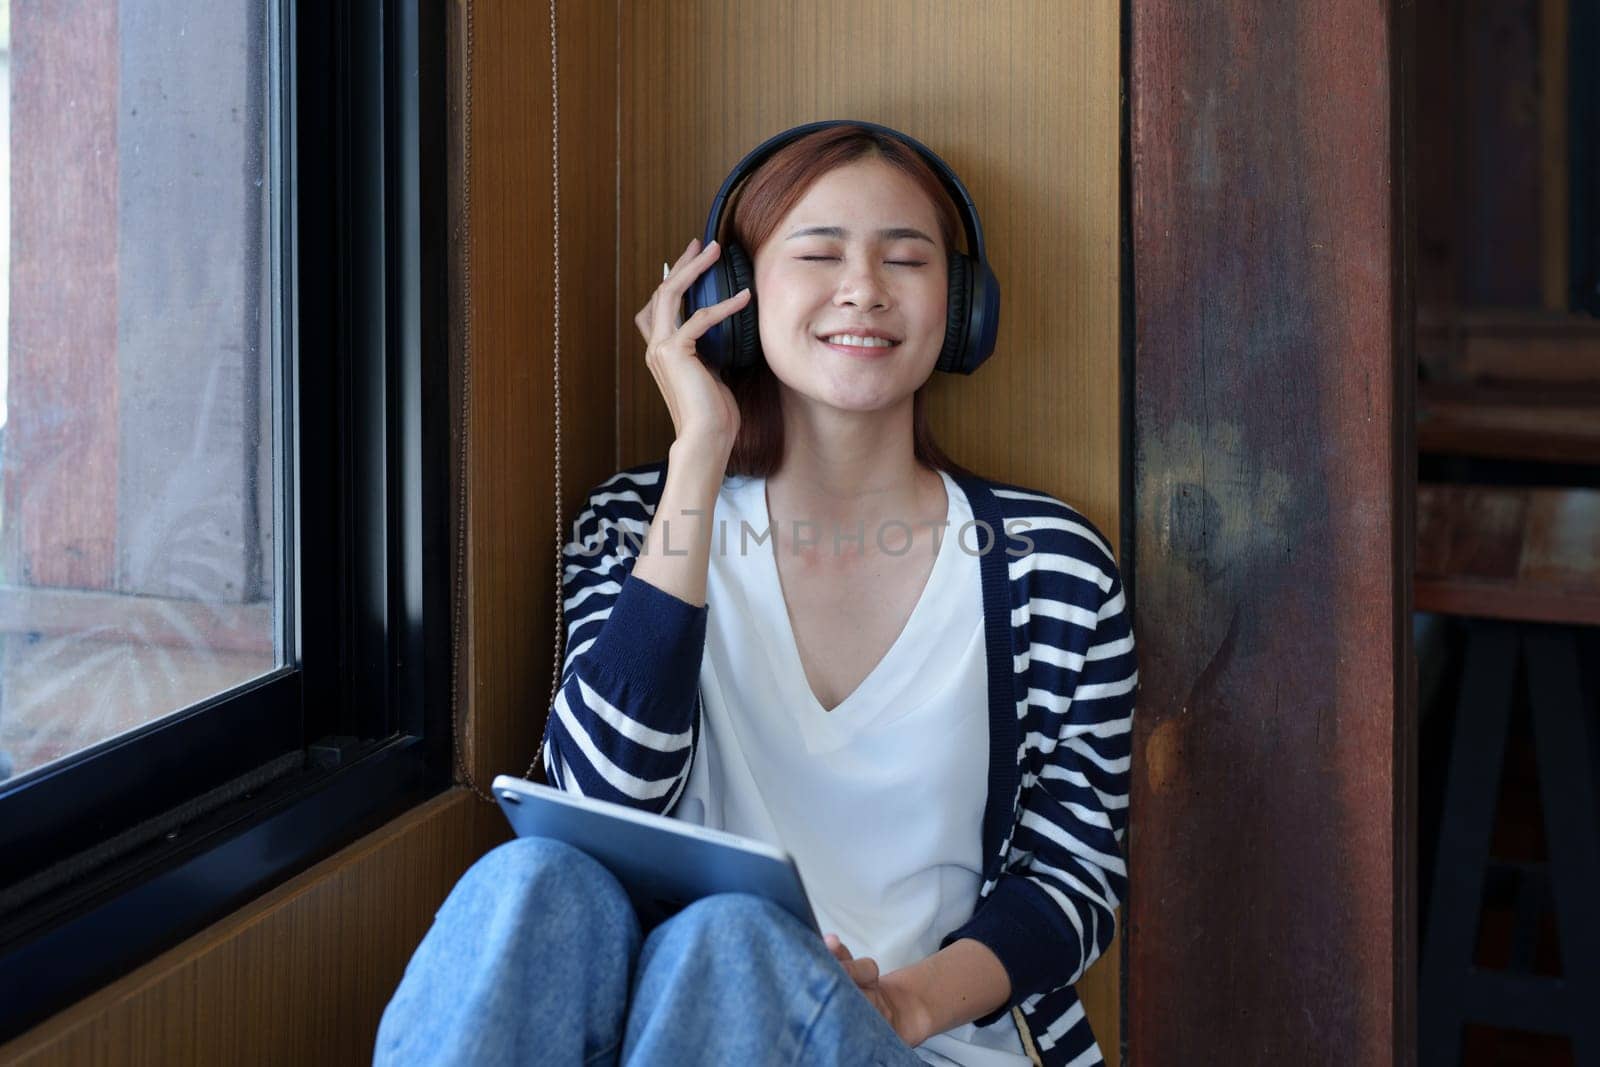 A portrait of a young Asian woman with a smiling face using a tablet computer and wearing headphones over her ears is sitting happily relaxing.